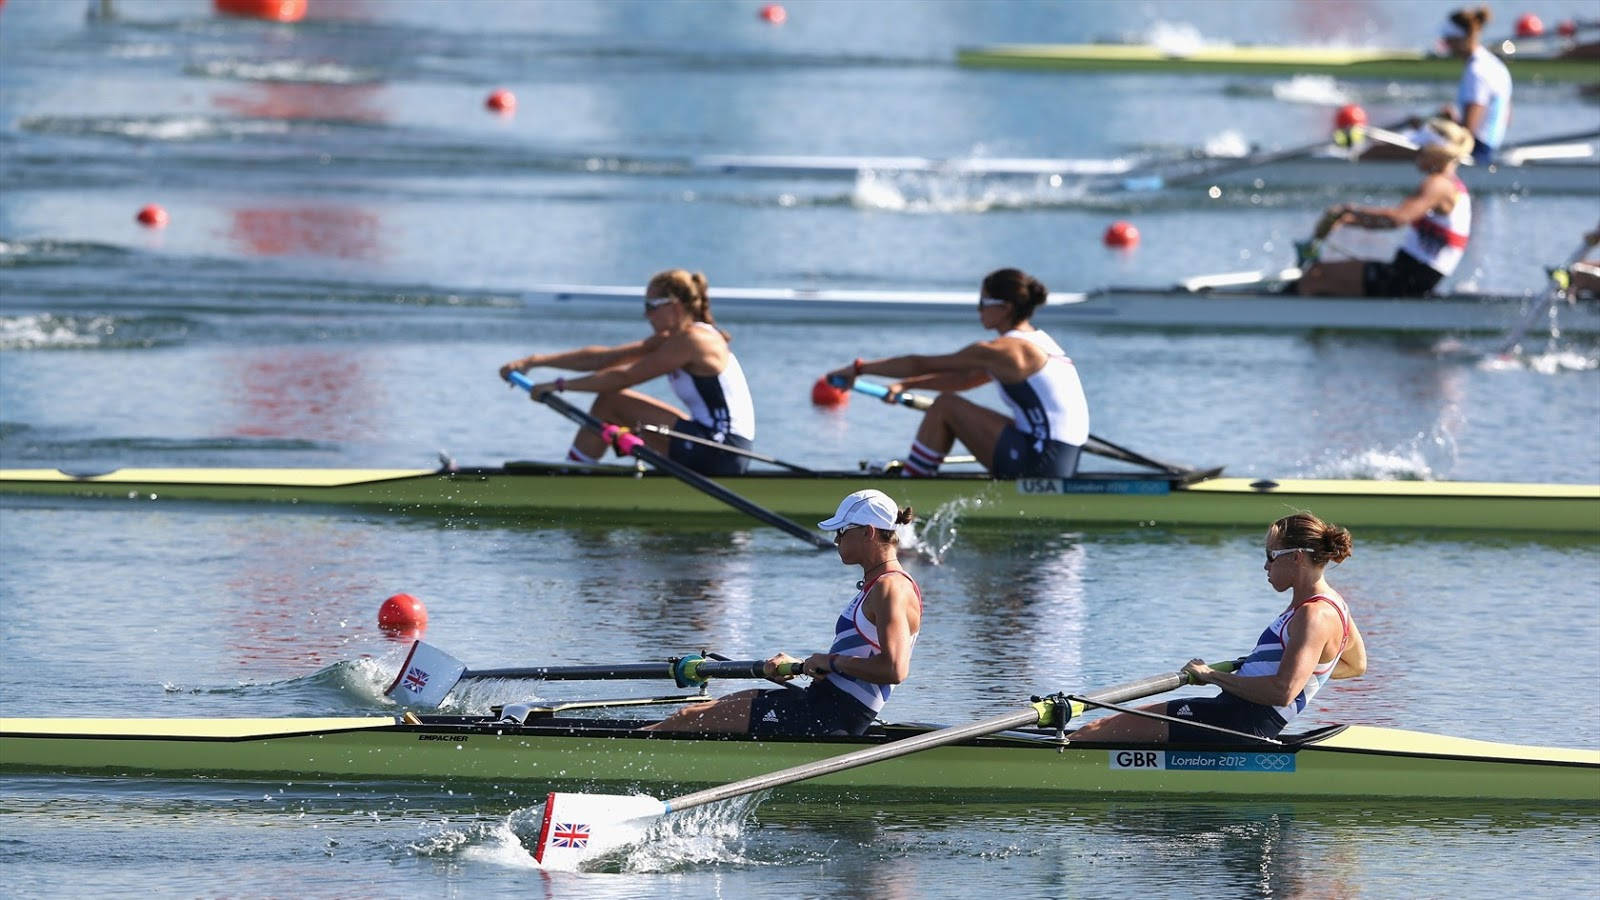 Coxless Pair Women's Rowing Competition Background